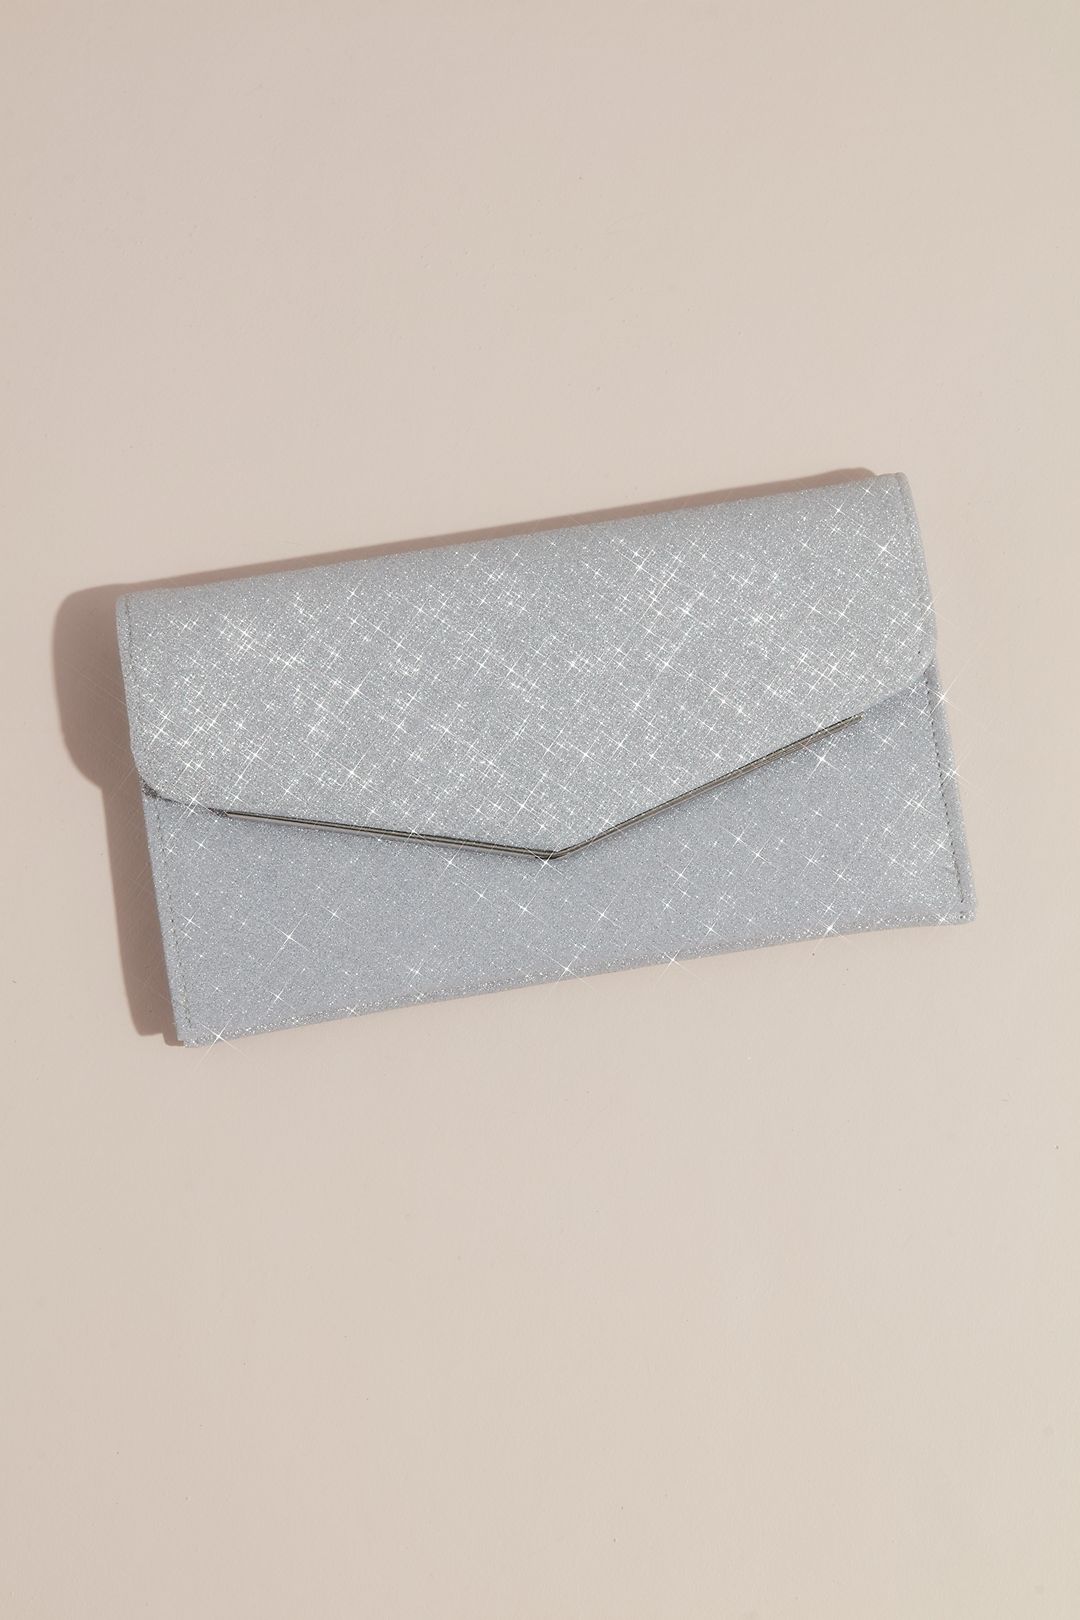 Glitter Envelope Clutch with Metal Edge Image